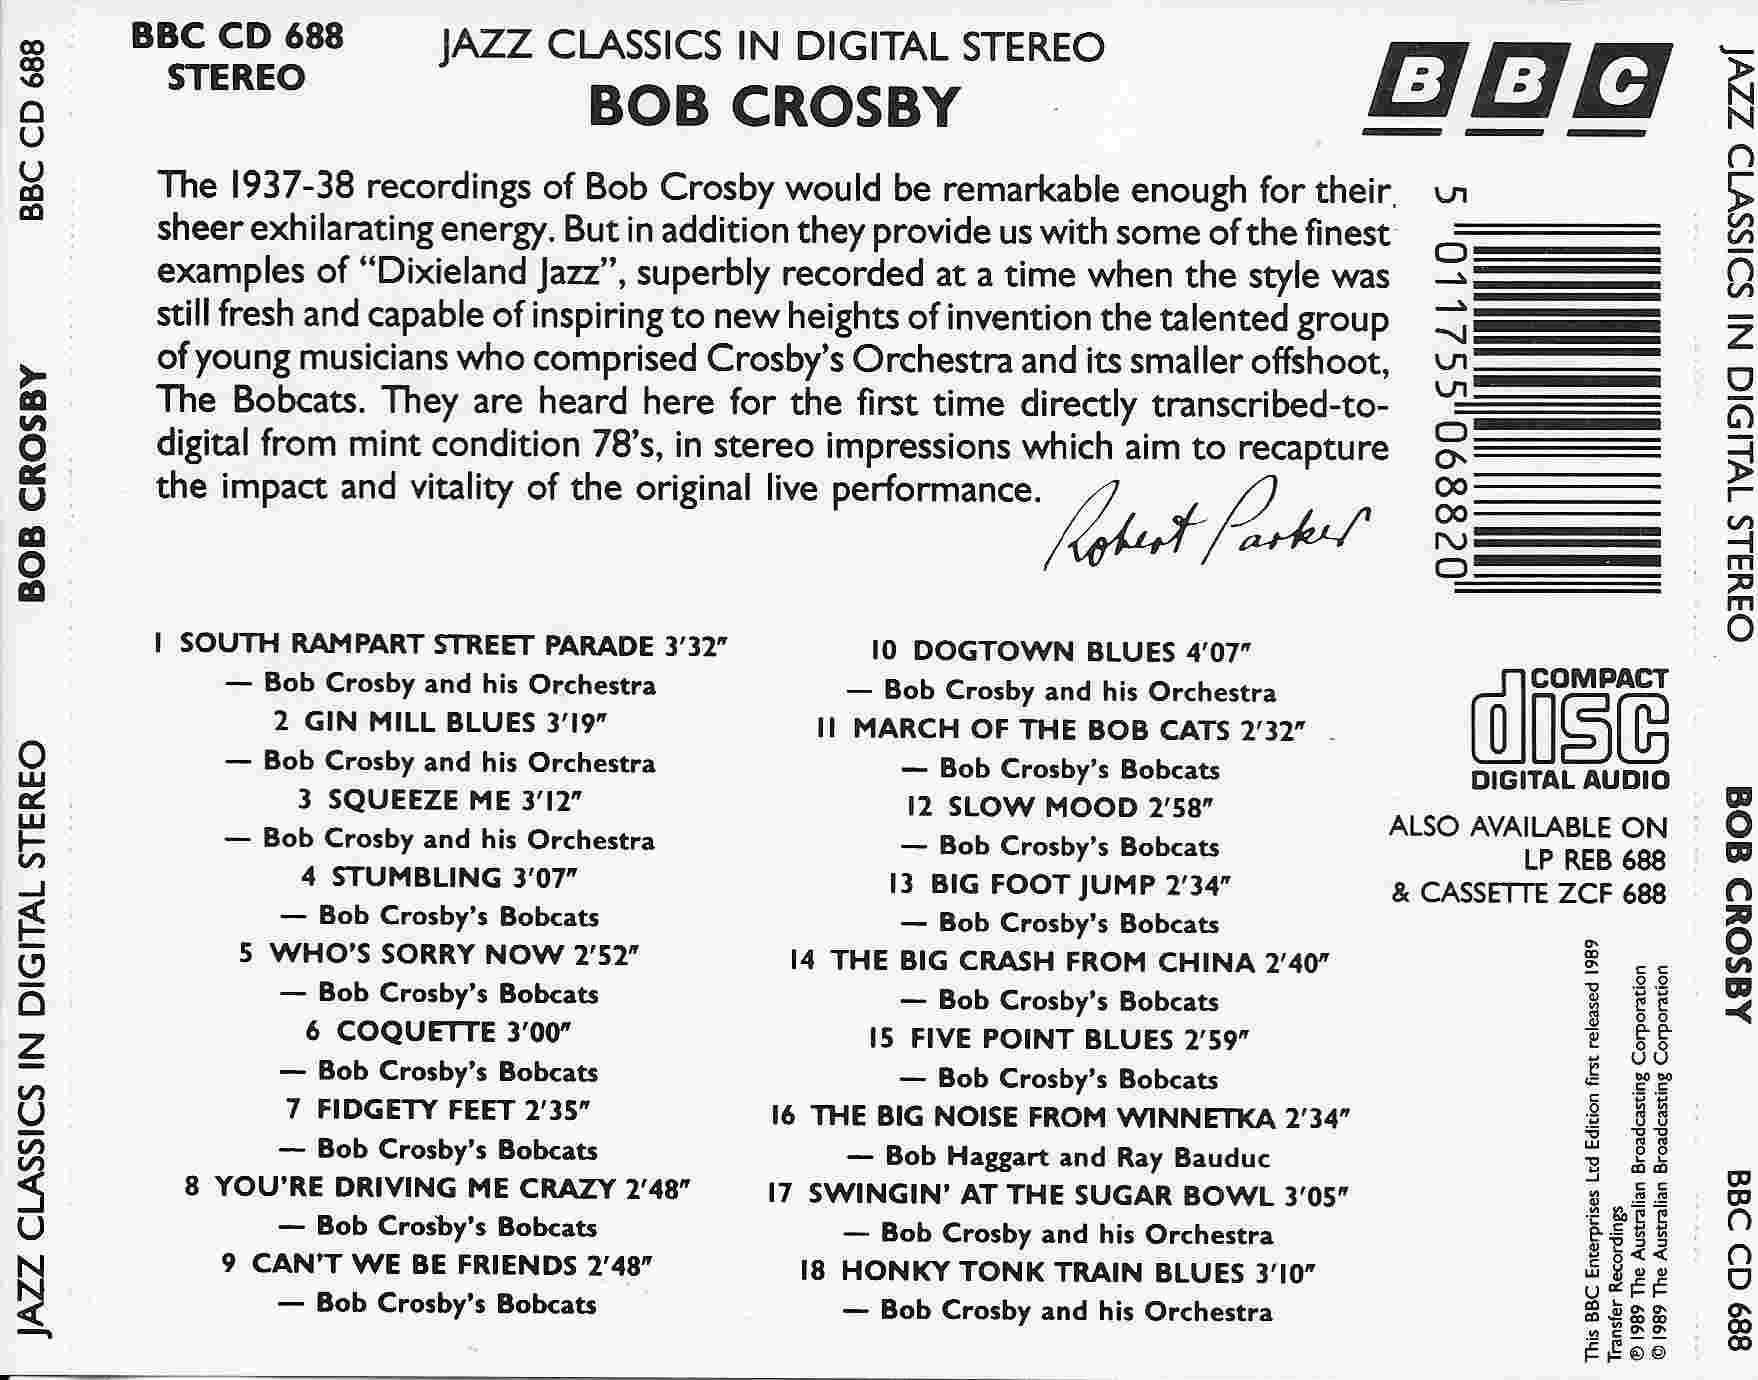 Picture of BBCCD688 Jazz classics - Bob Crosby by artist Bob Crosby from the BBC records and Tapes library